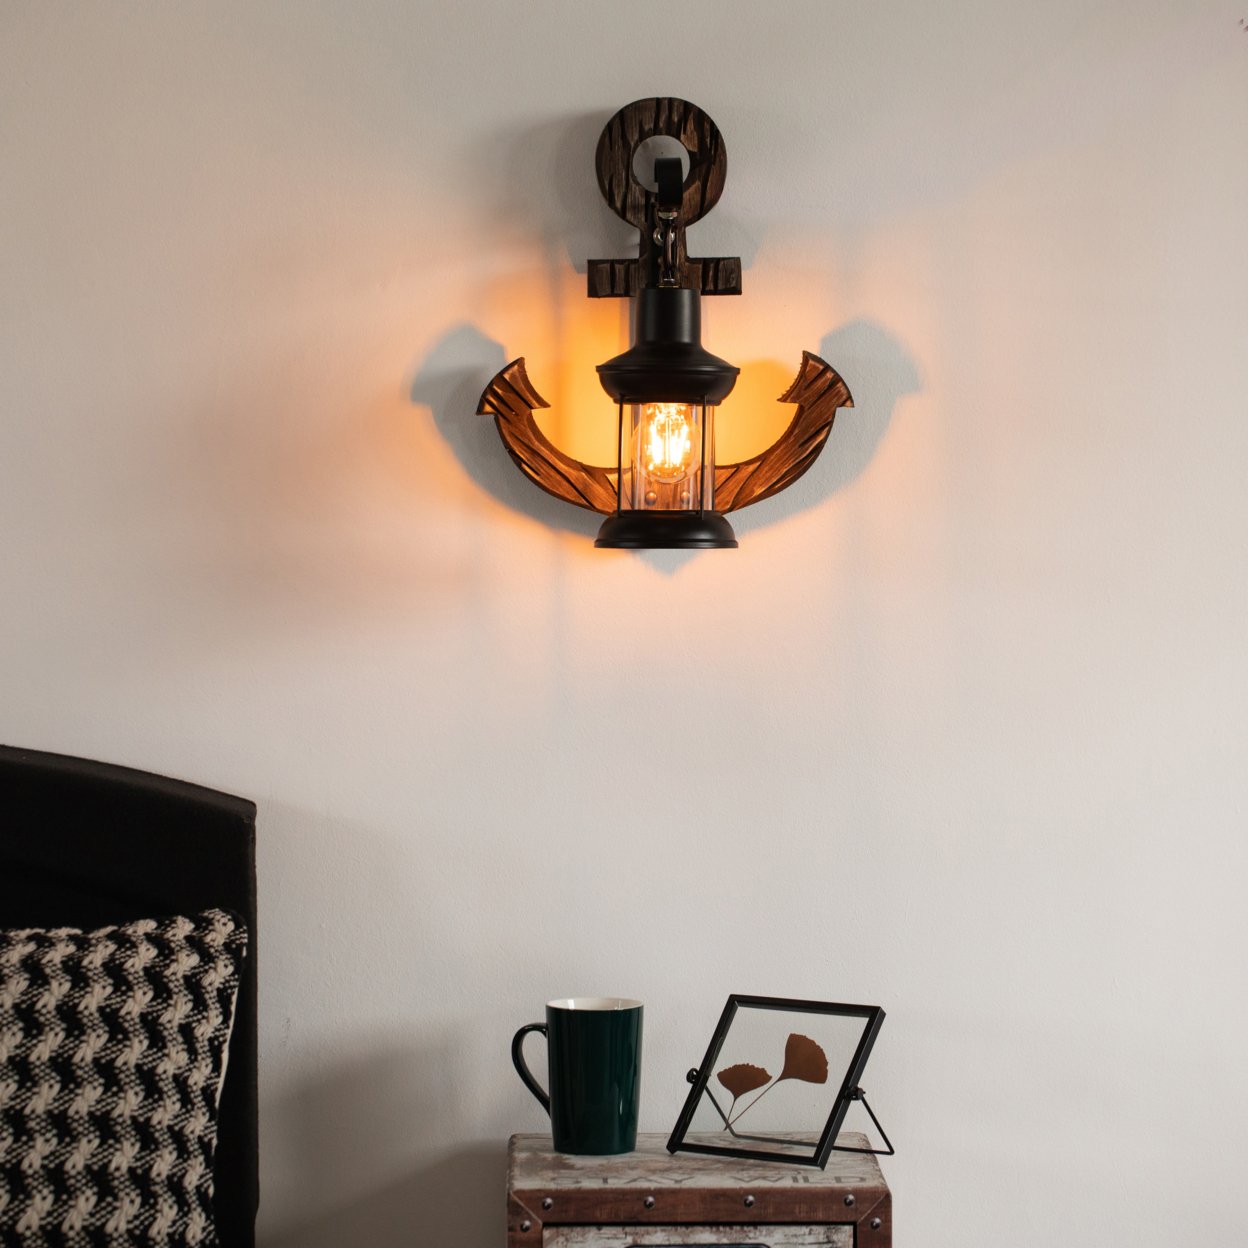 Vintage Industrial Anker Shape Wooden Wall Lamp, Wall Sconce Light Home, Restaurant or Bar